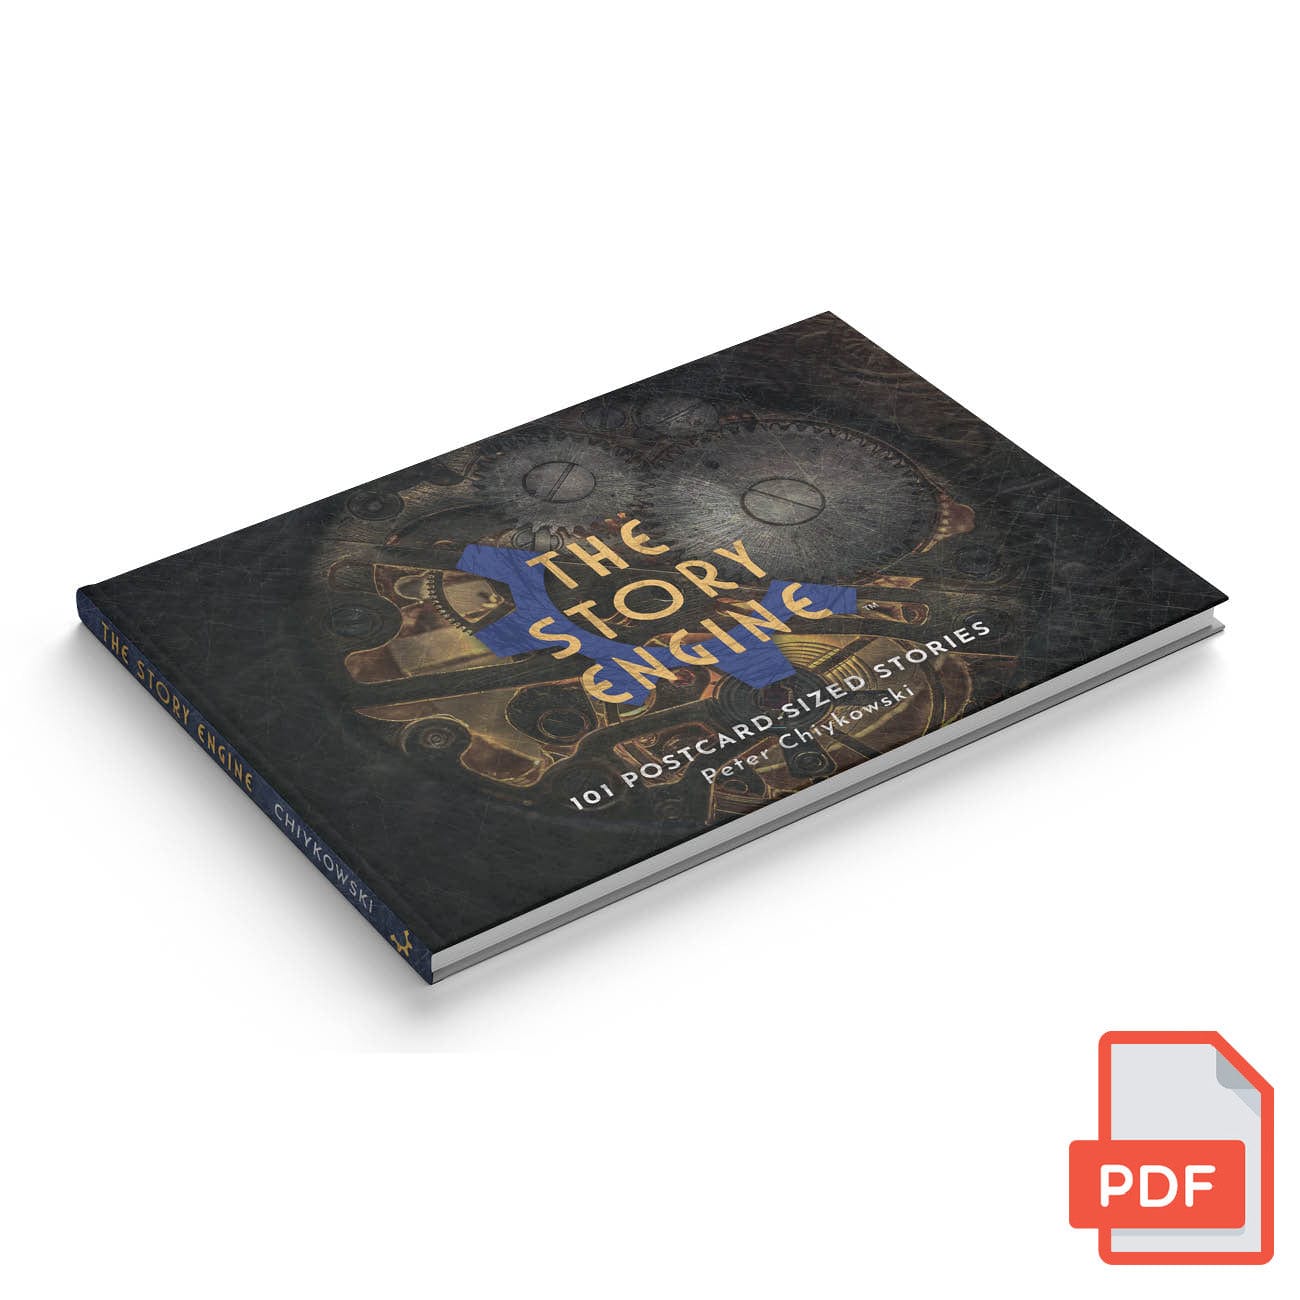 PDF Story Engine Anthology - The Story Engine Deck of Writing Prompts